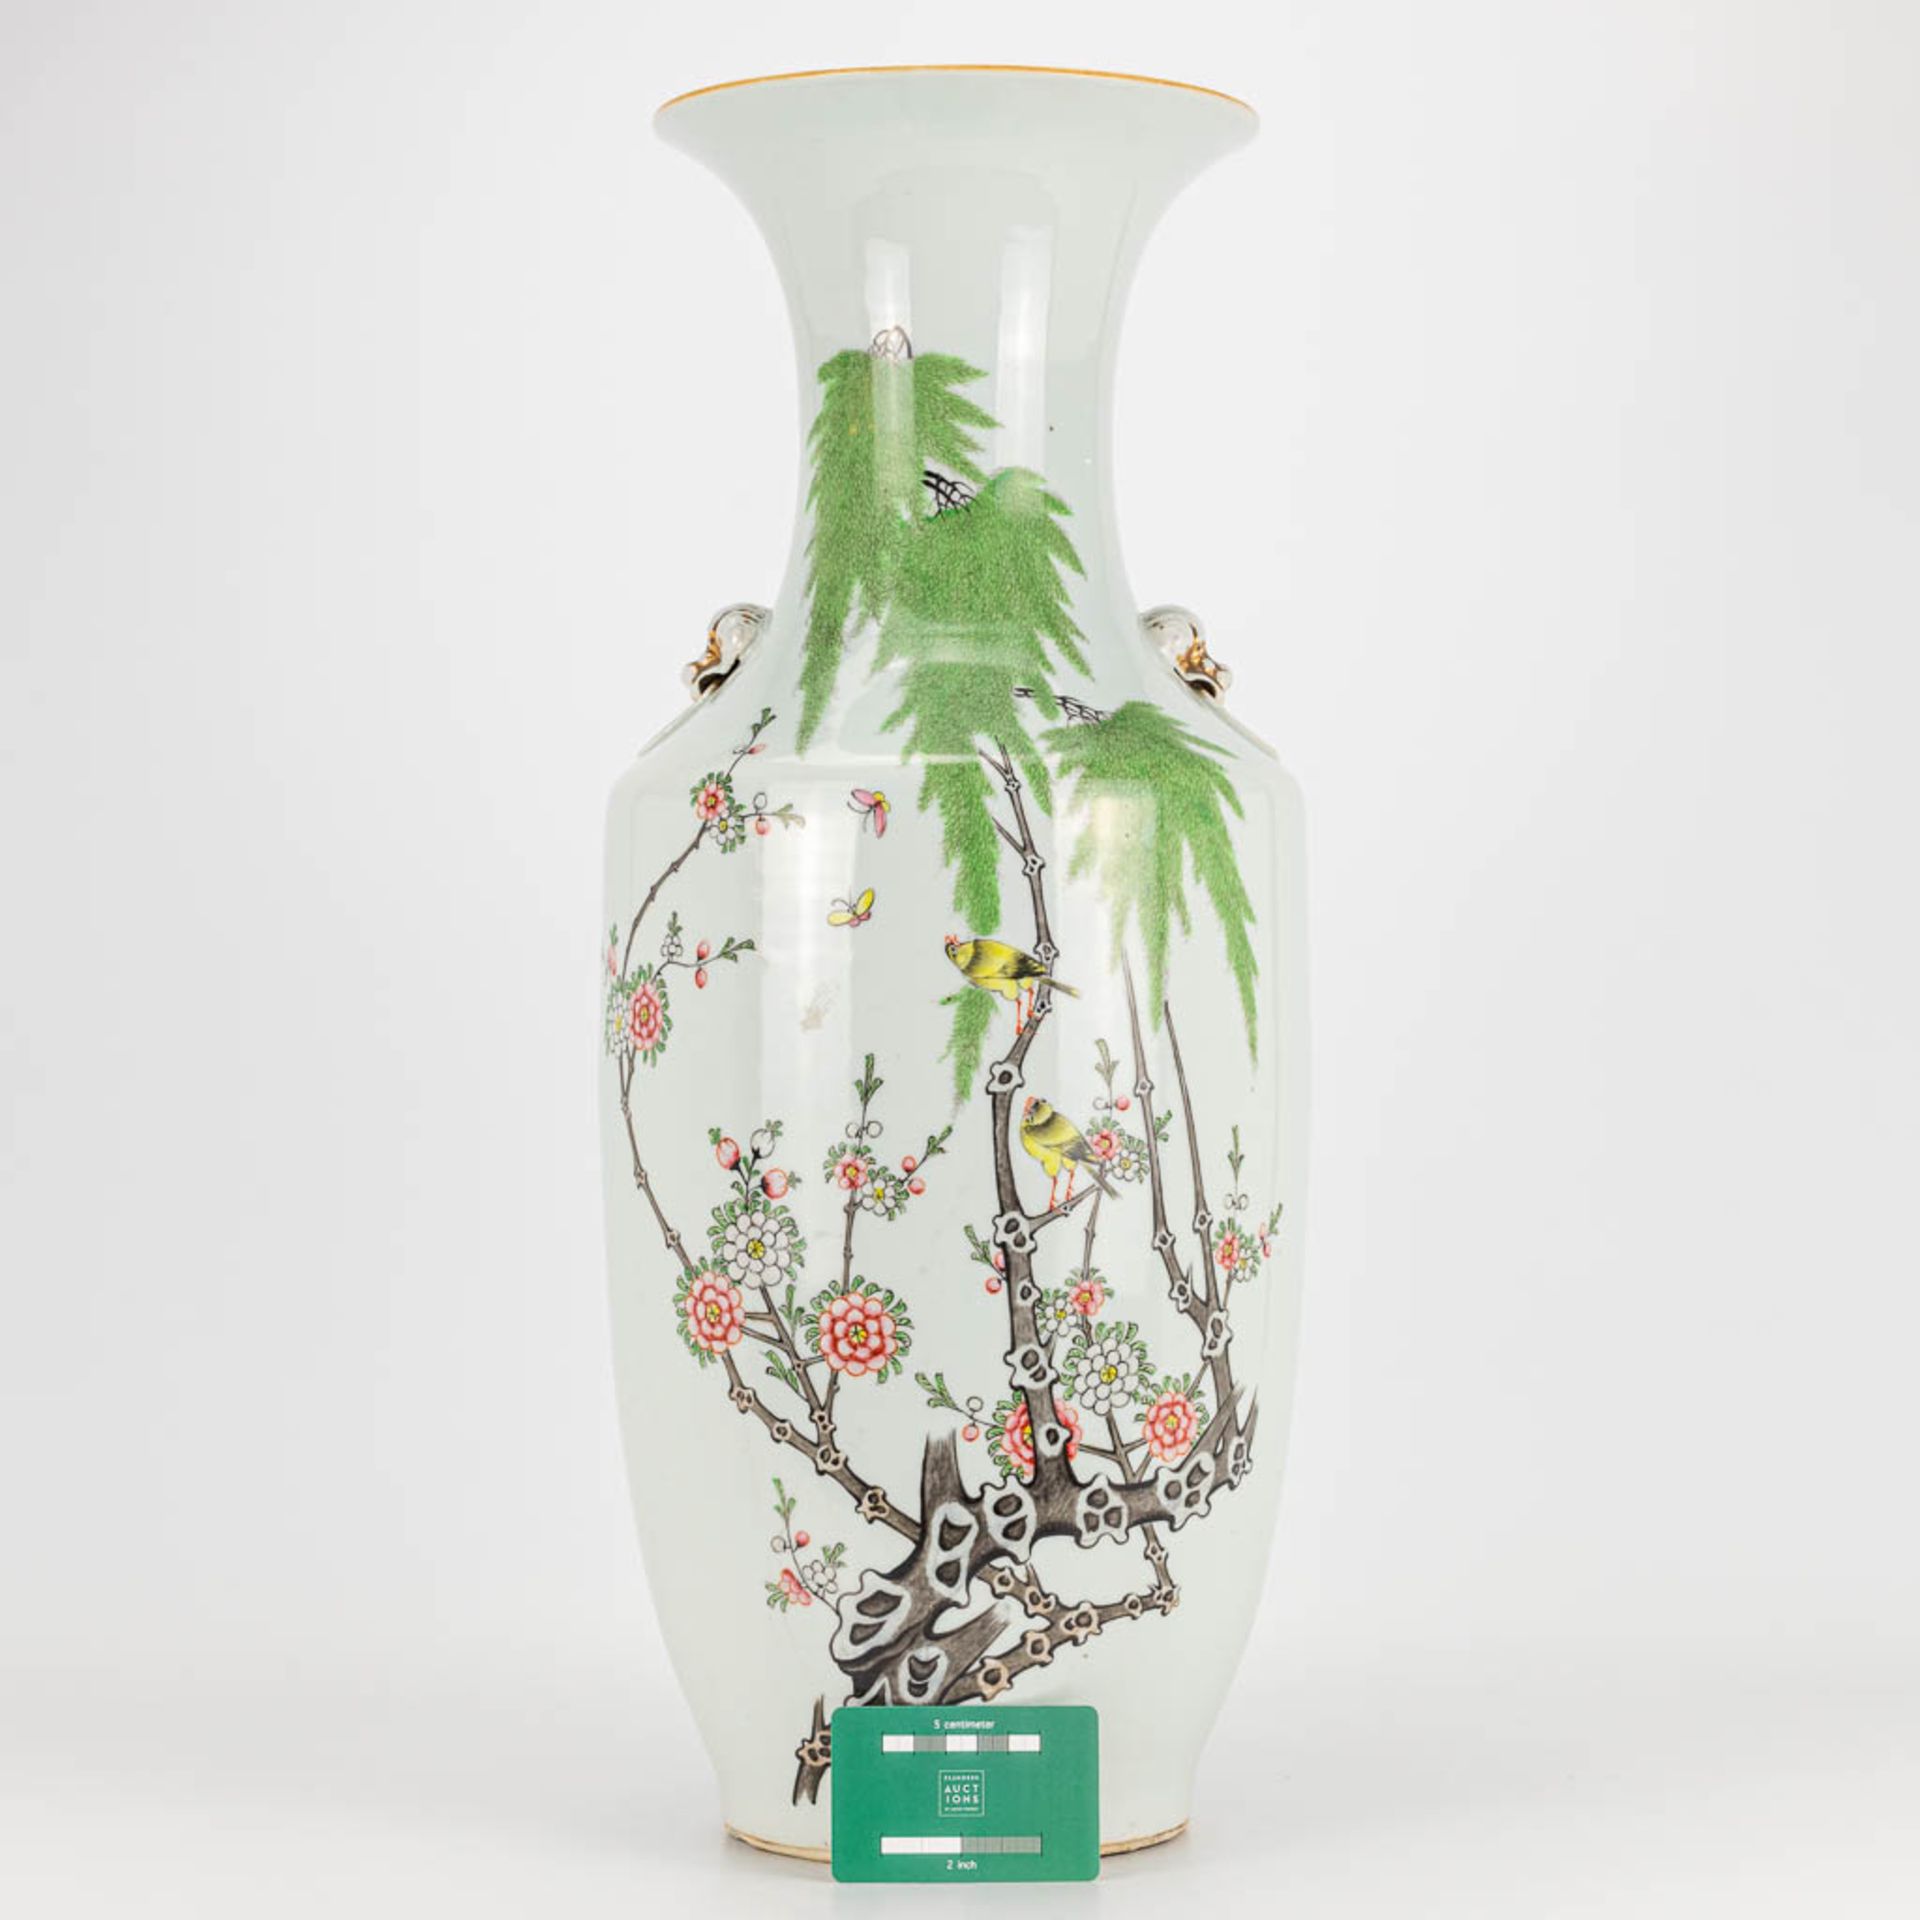 A vase made of Chinese porcelain and decorated with flowers and birds. - Image 3 of 16